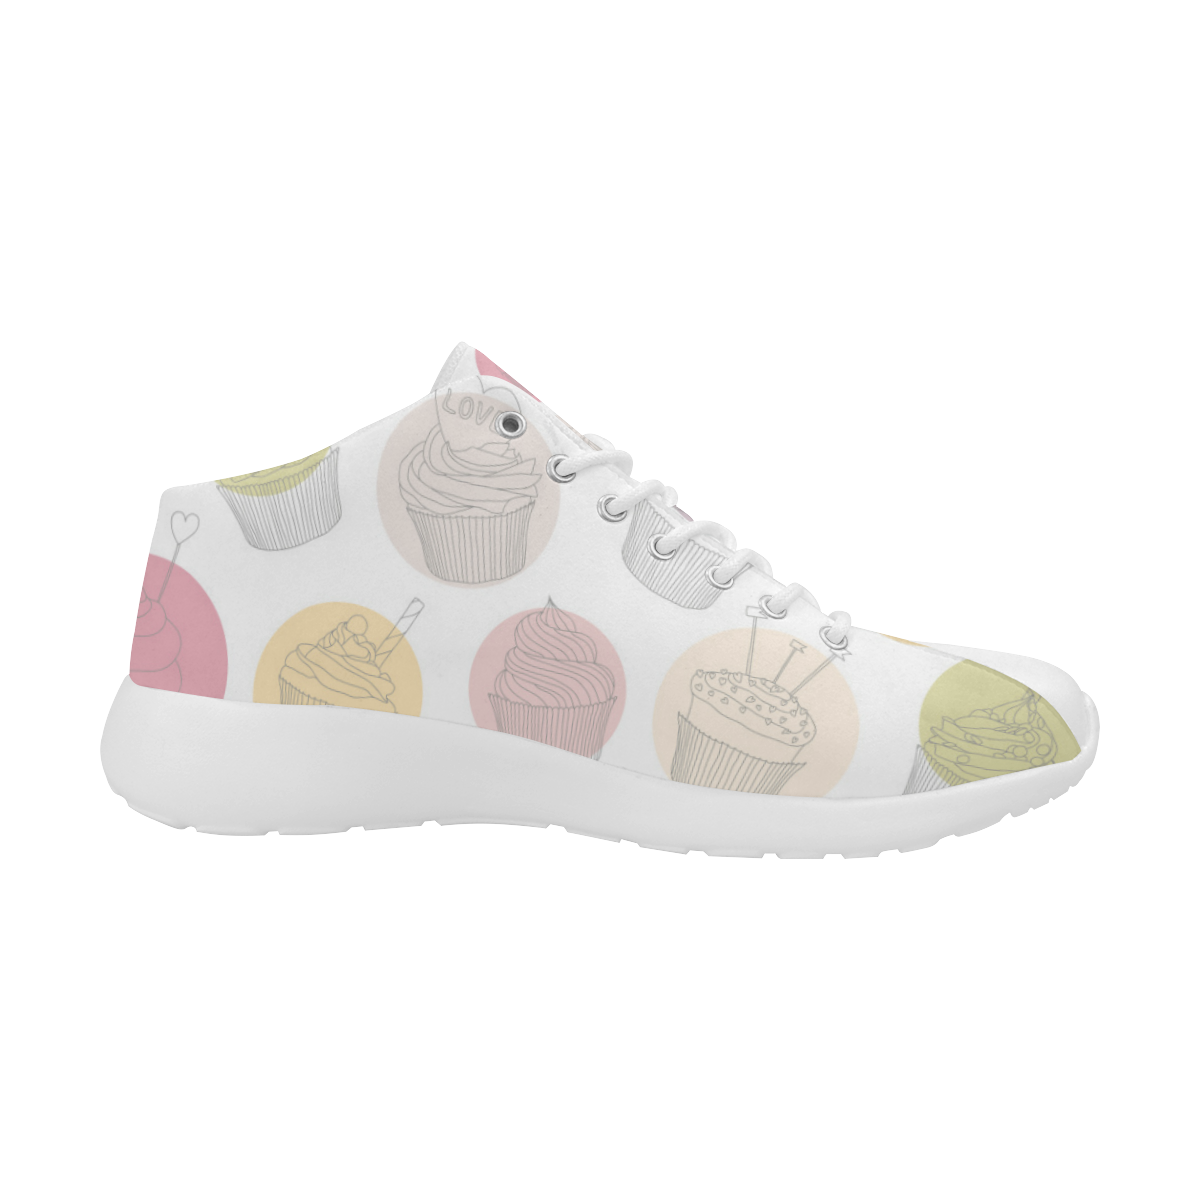 Colorful Cupcakes Women's Basketball Training Shoes/Large Size (Model 47502)